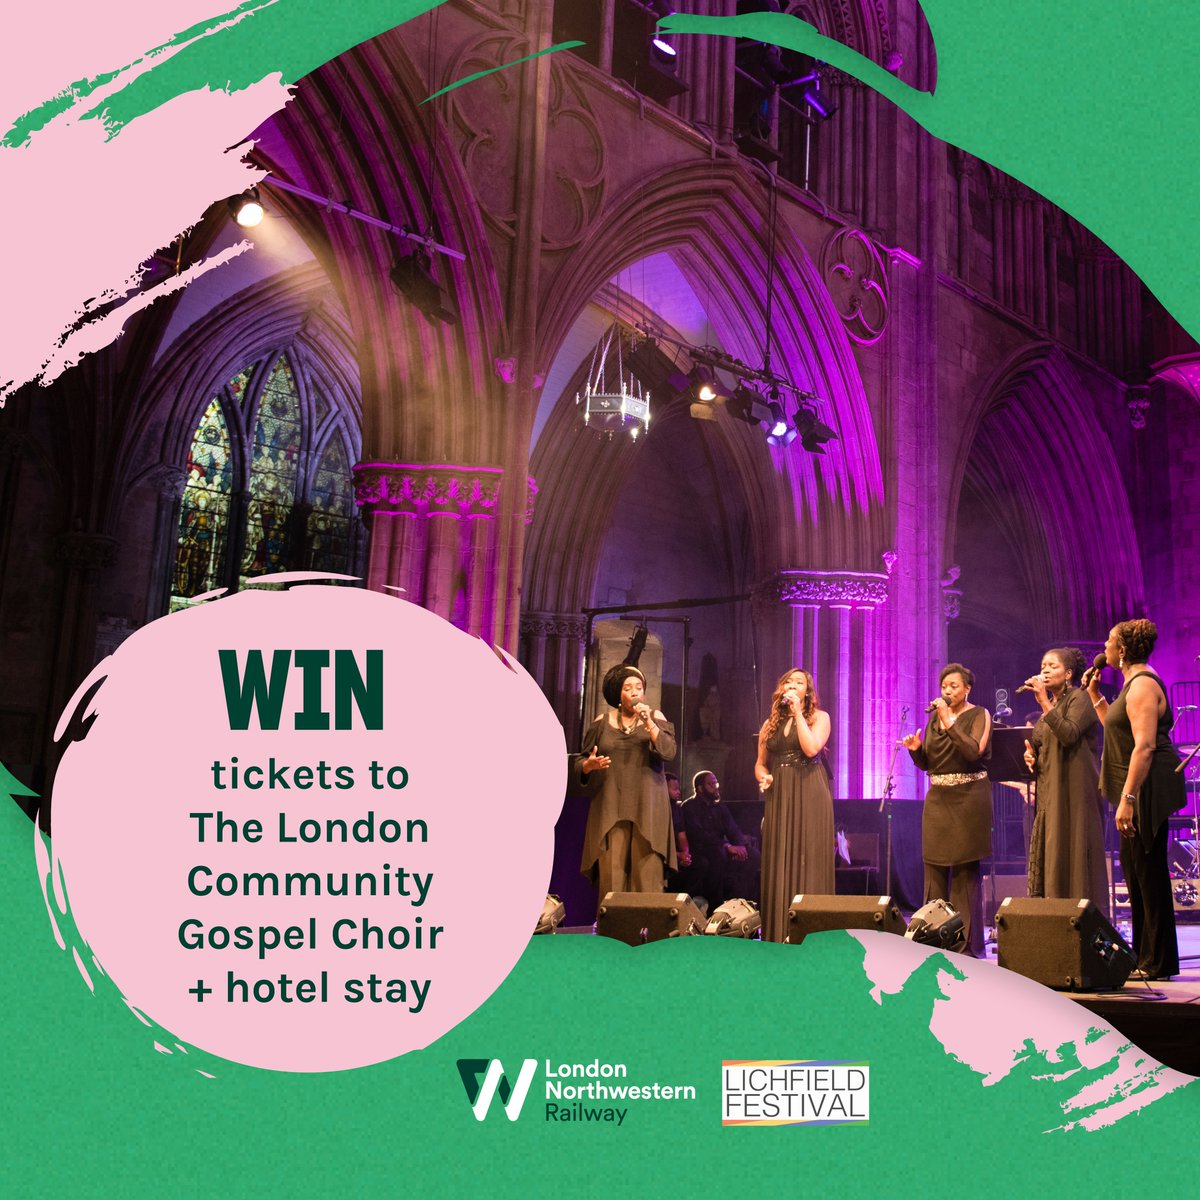 🎹 Music will take over the city during #LichfieldFestival.

Thanks to @lichfieldfest, we will give away tickets to the London Community Gospel Choir on 6th July and a complimentary overnight stay at Swinfen Hall.

Enter before 29/06 > orlo.uk/WDPwN

#LichFest23